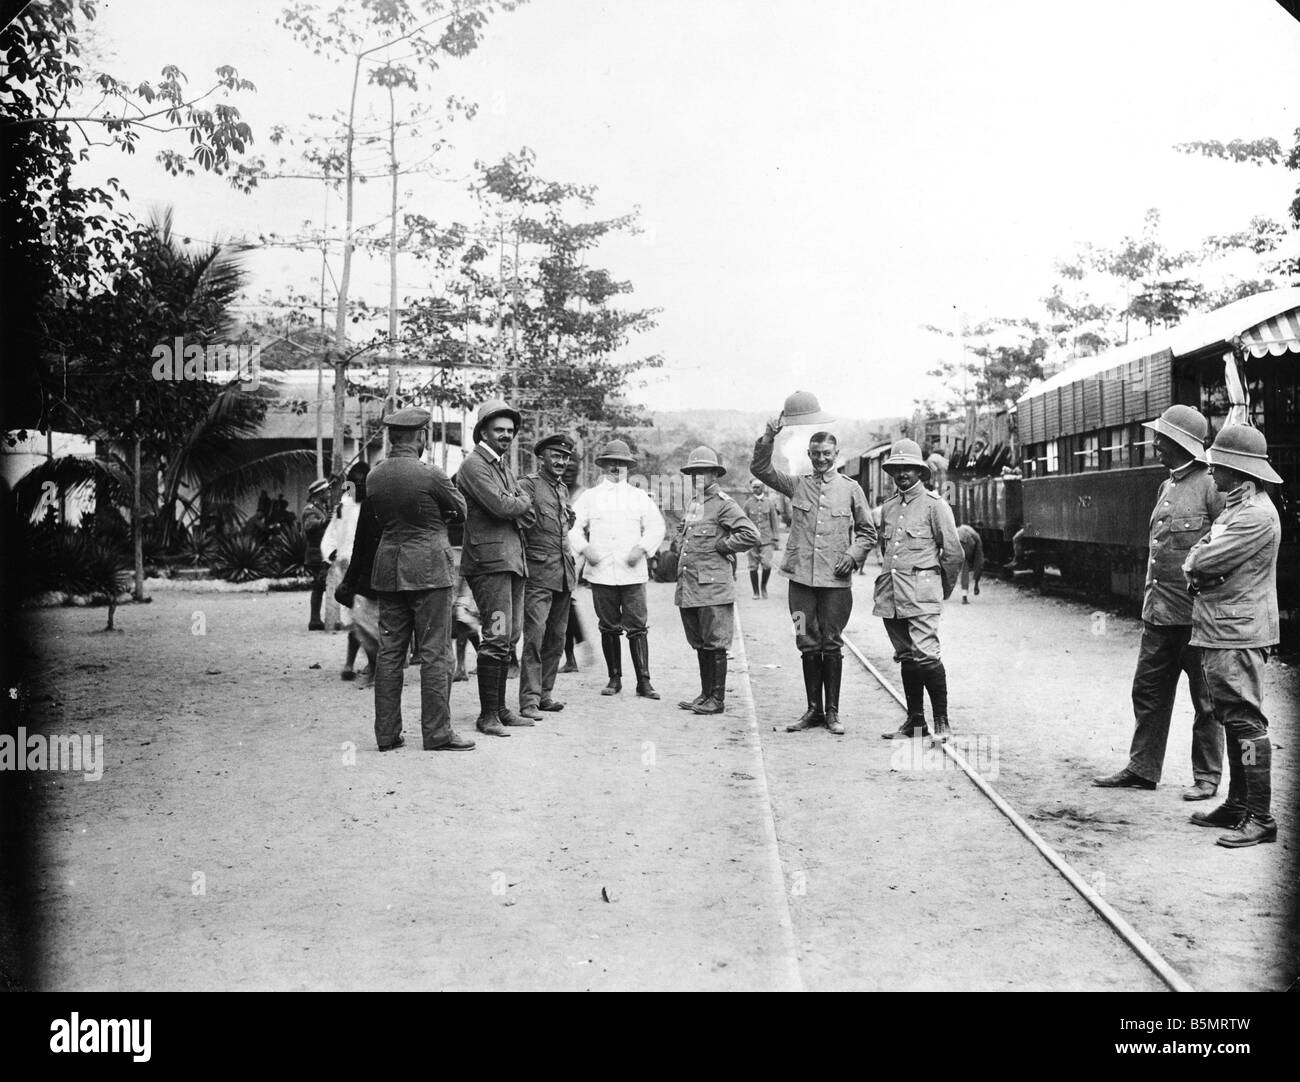 9AF 1914 0 0 A4 3 Station in German East Africa Photo World War I War in the colonies German East Africa today Tanzania Soldiers Stock Photo